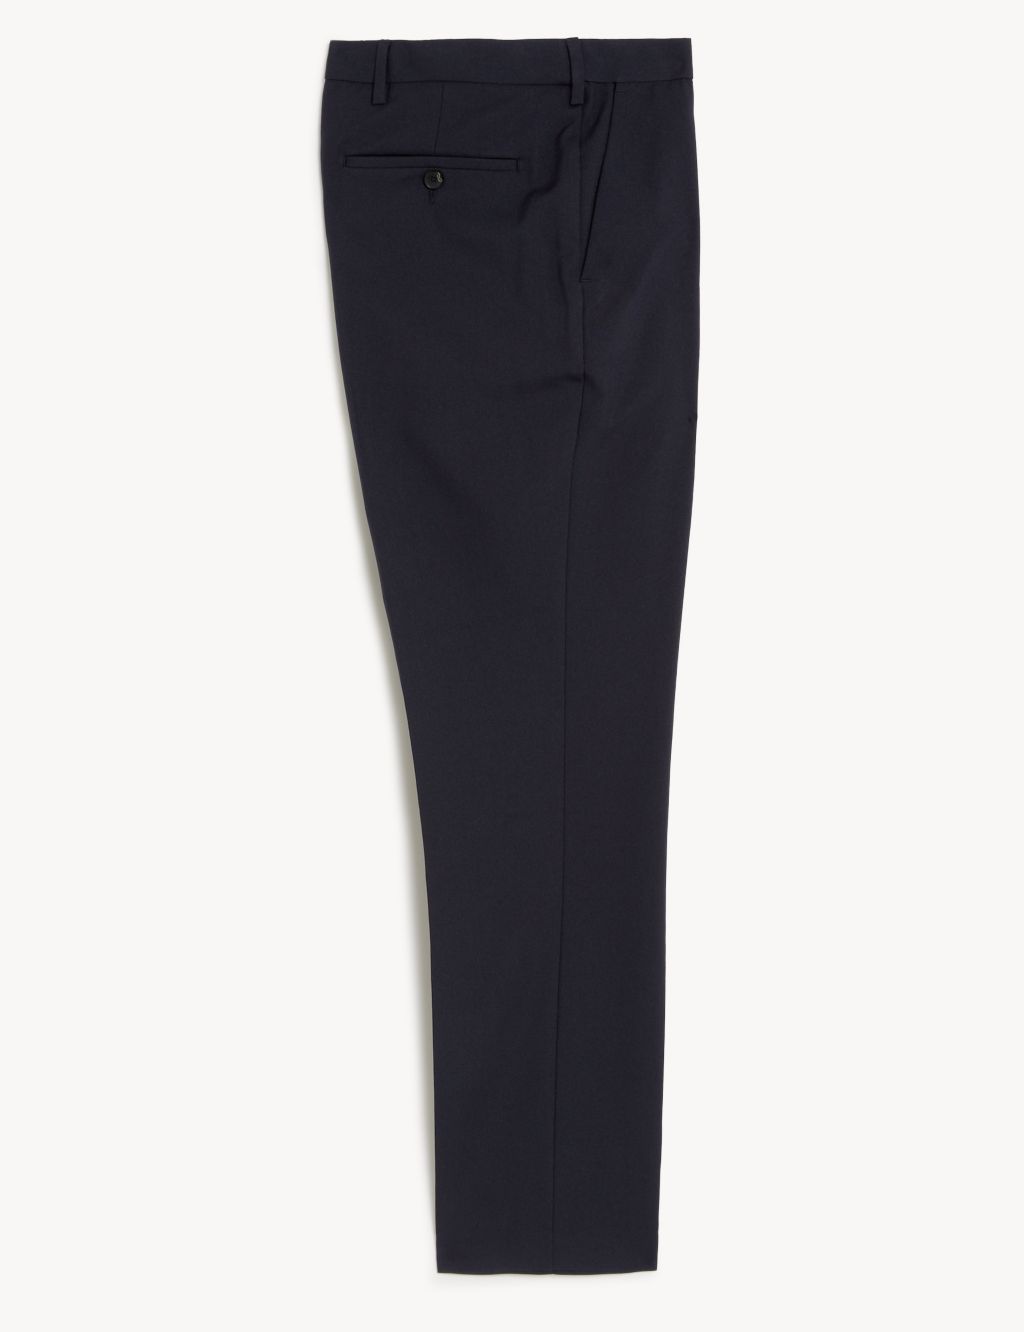 Regular Fit Single Pleat Trousers with Active Waist image 2